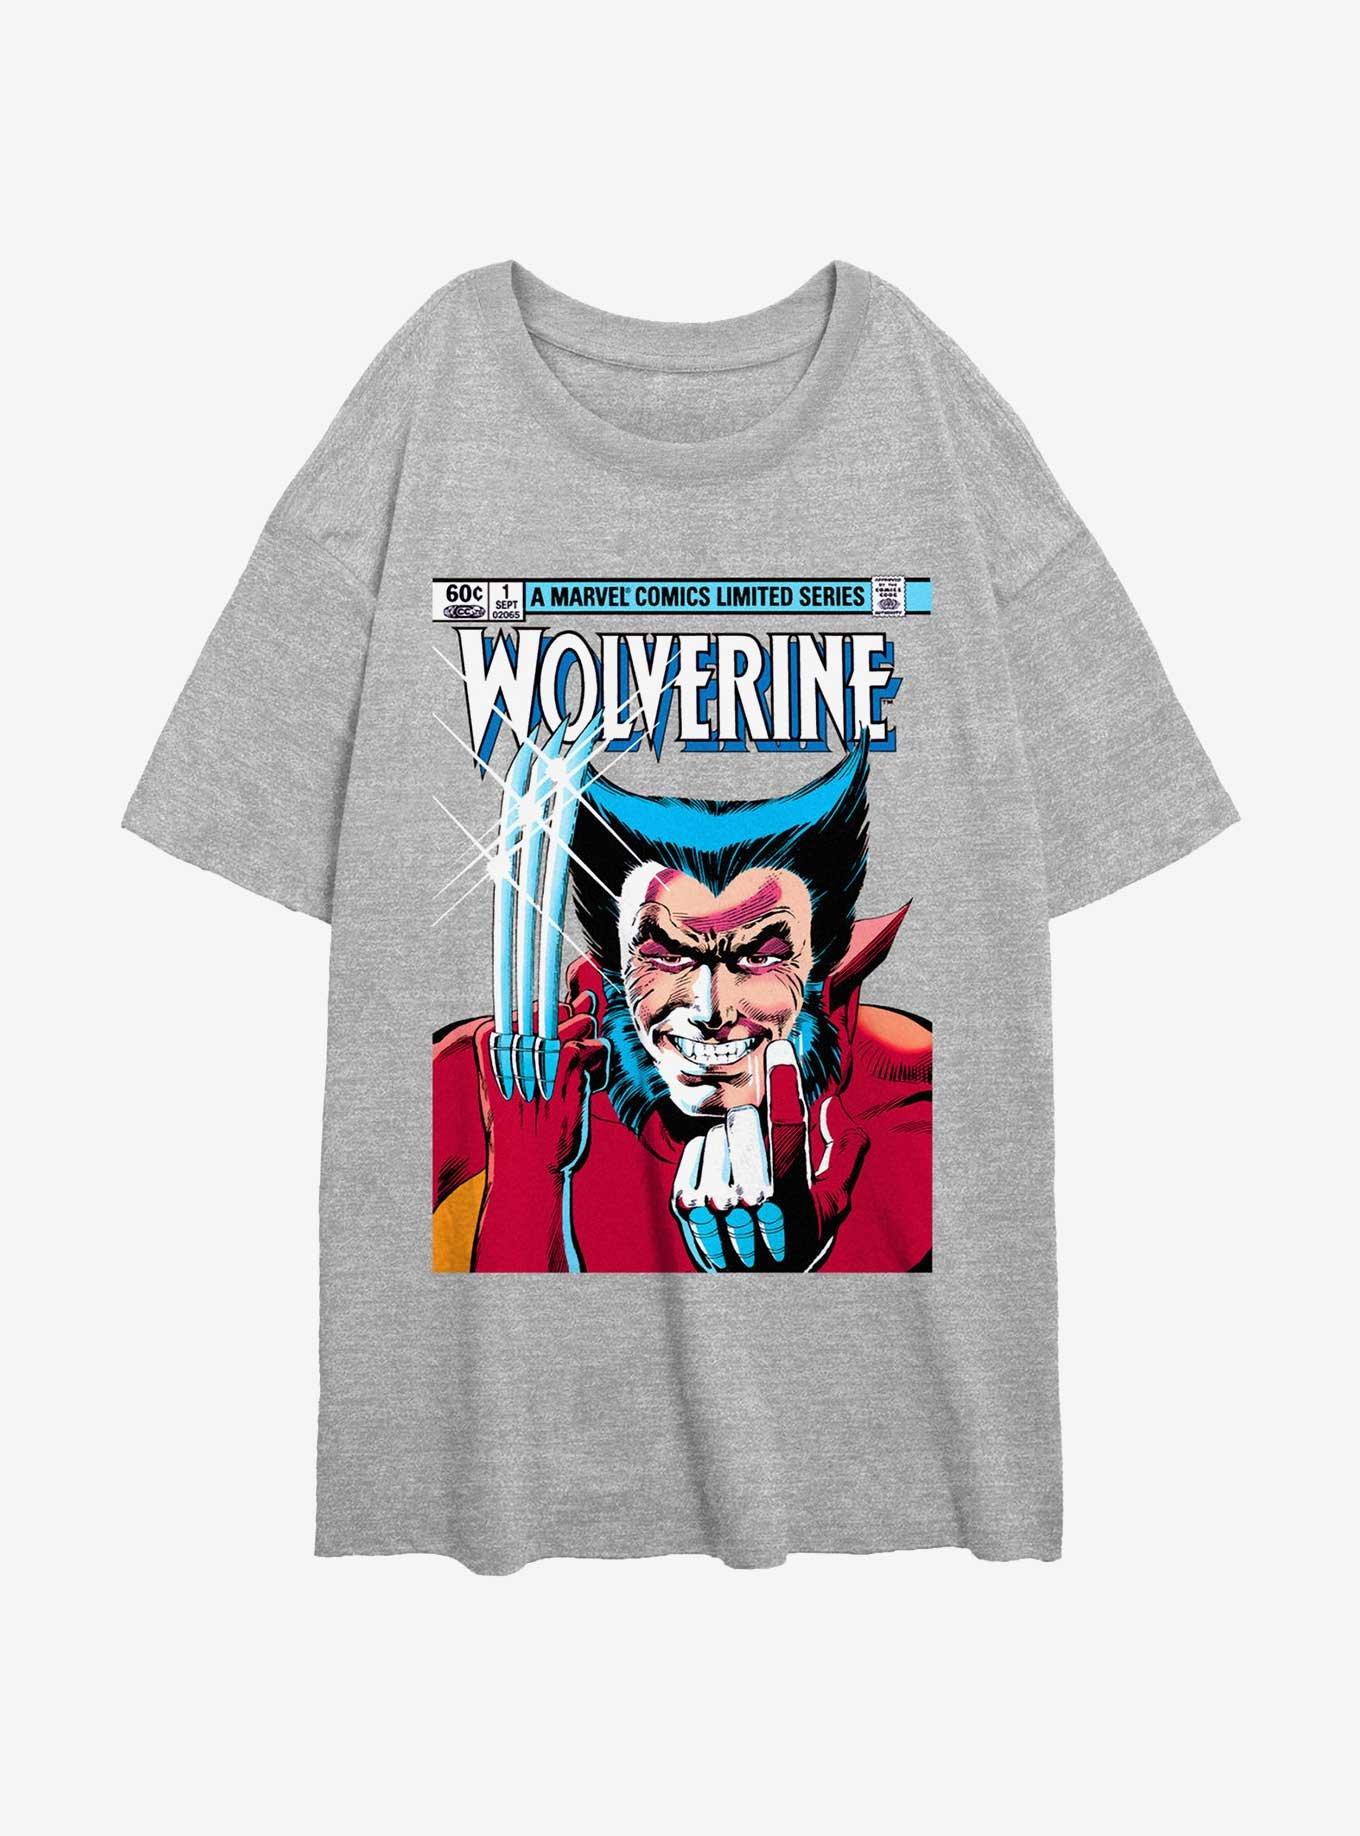 Wolverine 1st Issue Comic Cover Girls Oversized T-Shirt, ATH HTR, hi-res